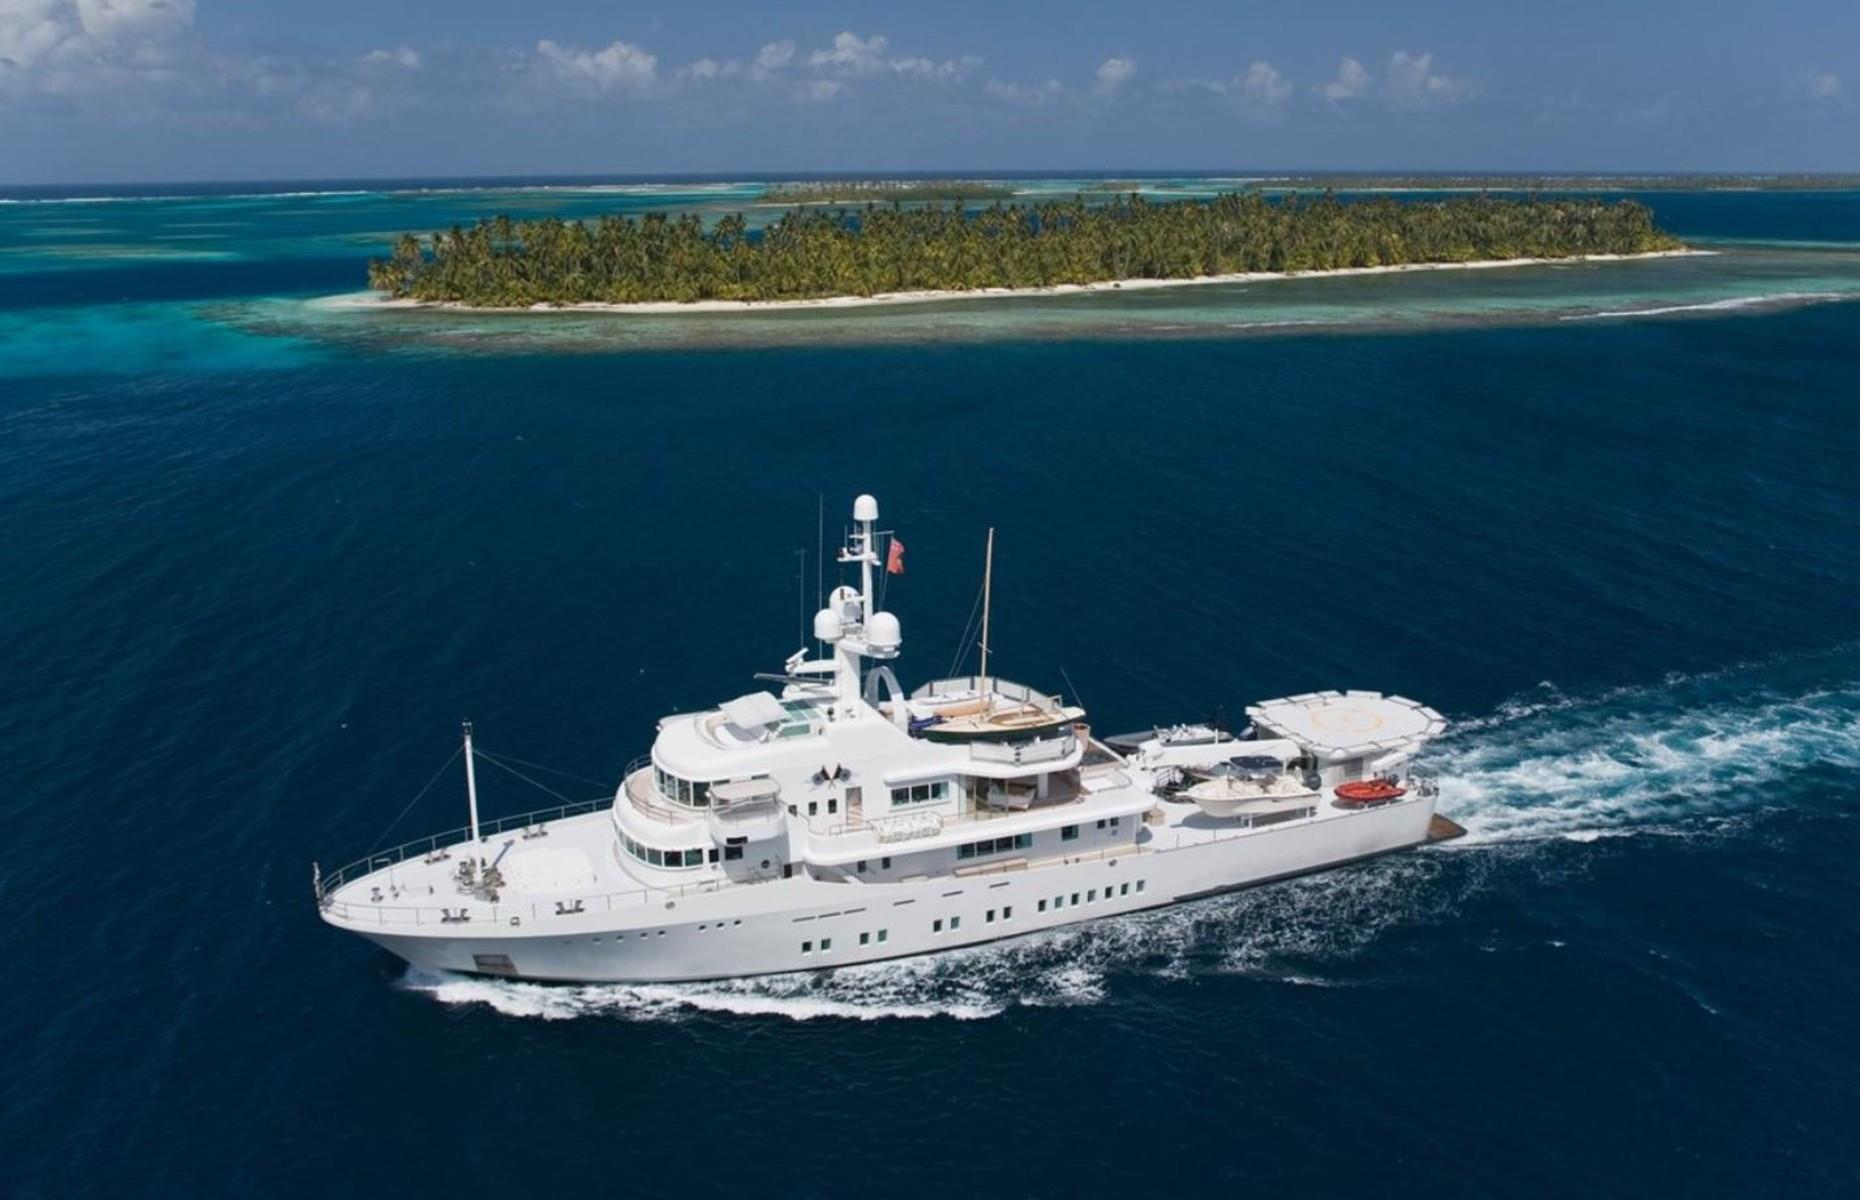 When he's not flying around in his collection of aircraft, Google co-founder Larry Page is exploring the seas on this incredible vessel. His 193-foot (59m) yacht, Senses, includes a private beach club with a jacuzzi and sunbeds, along with indoor and outdoor dining areas and a helicopter landing pad. Page bought Senses from the late Sir Douglas Myers for $45 million (£27.6m) in 2011.